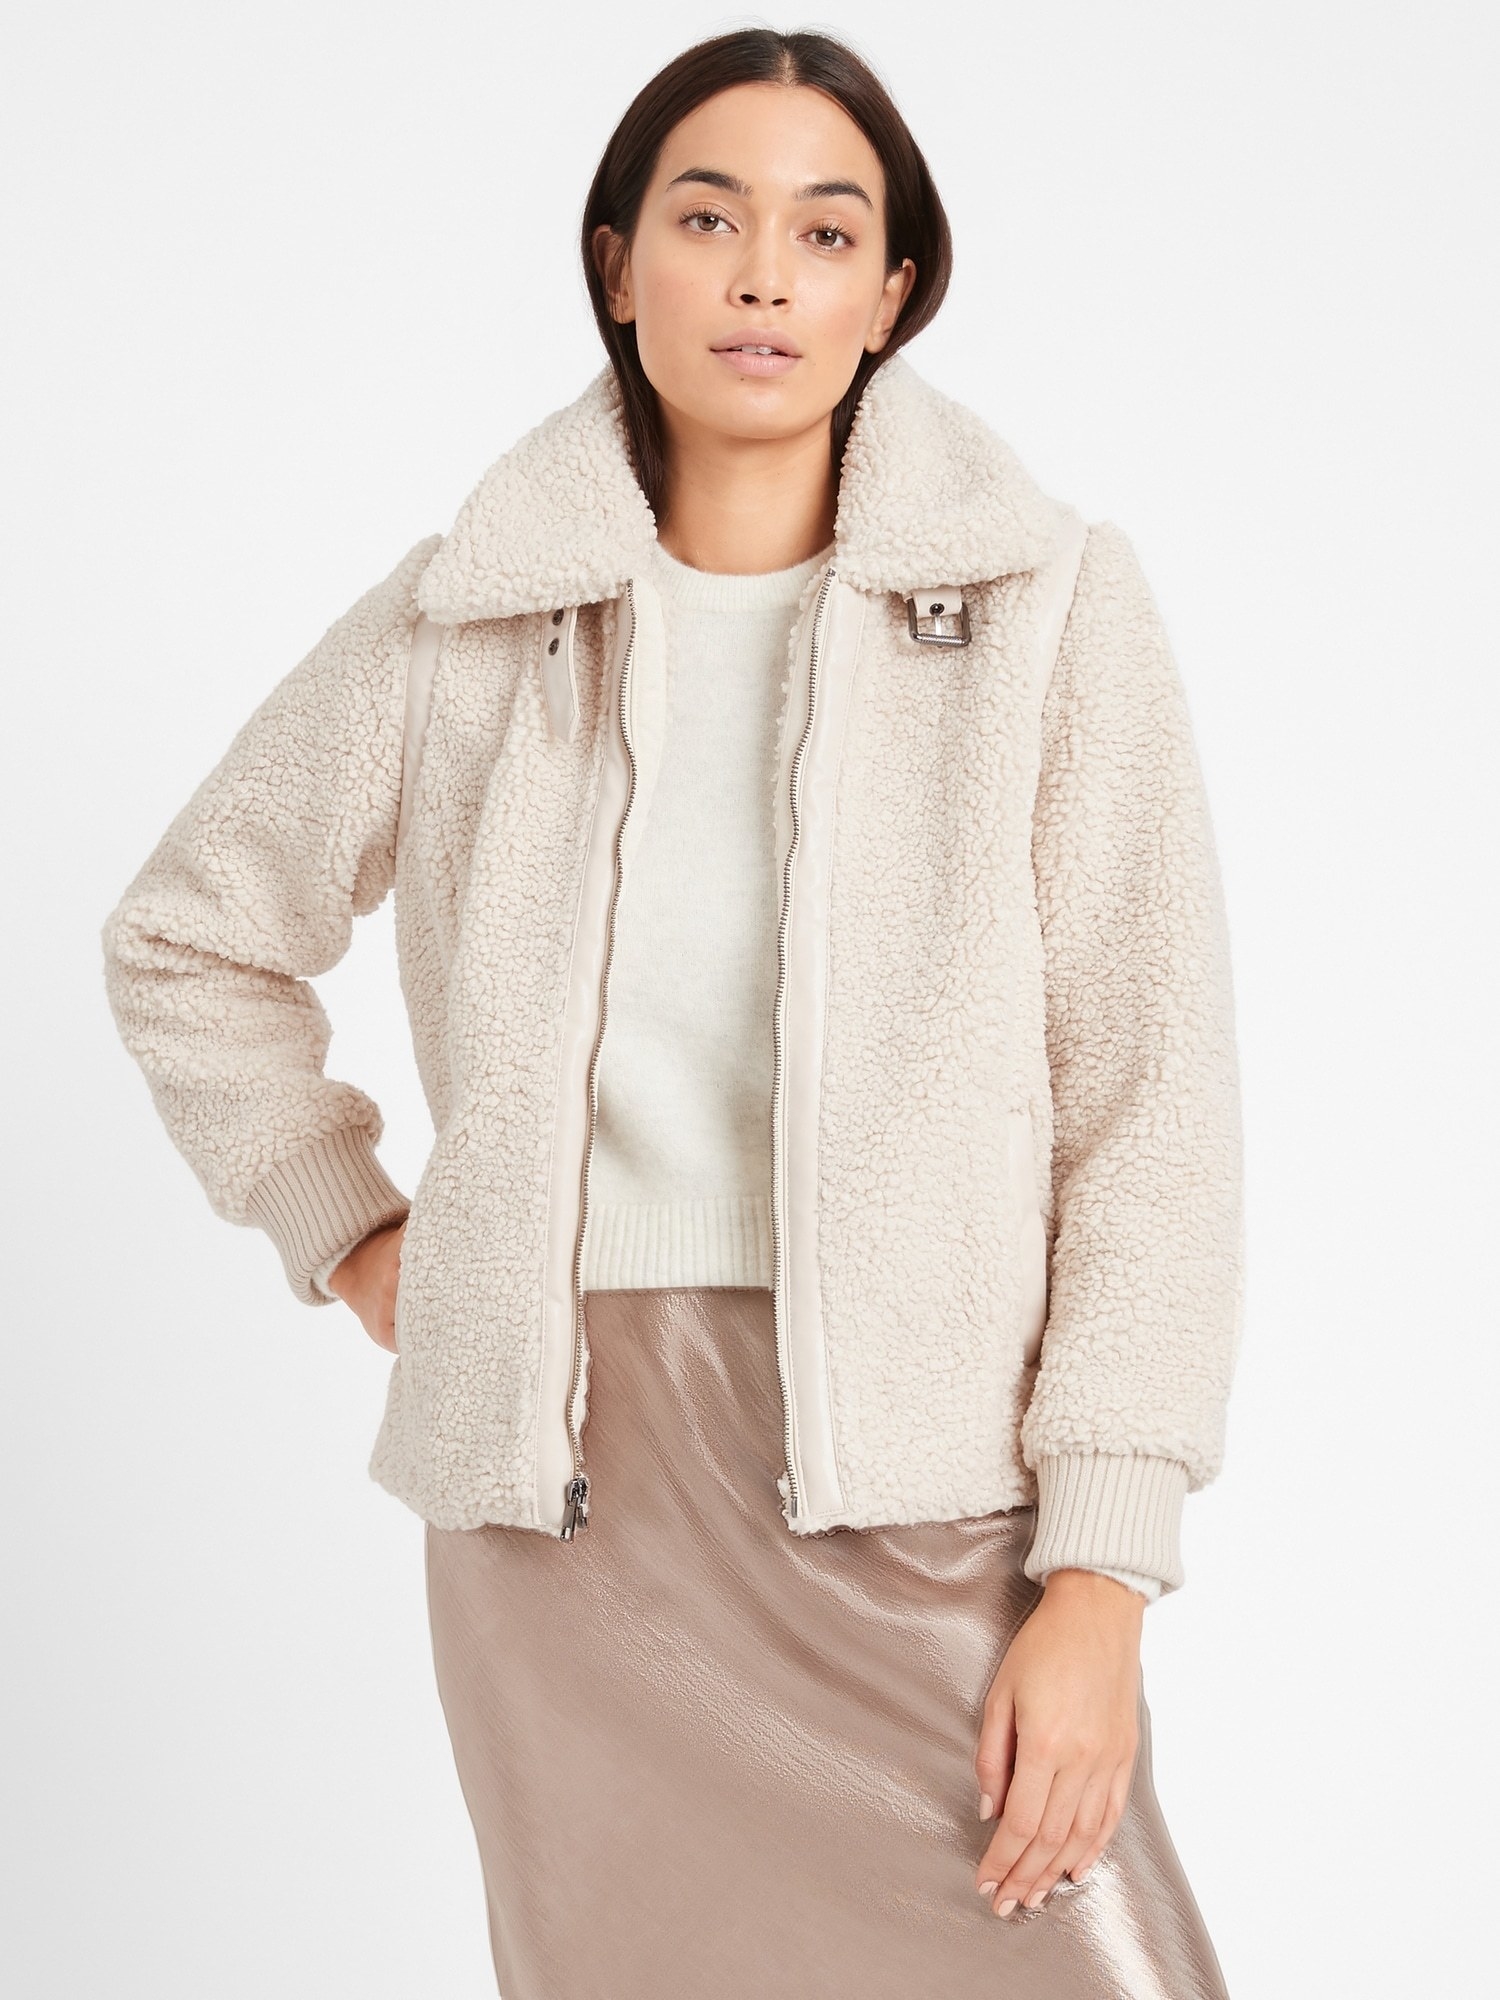 Model in the cream jacket with ribbed cuffs and zip front